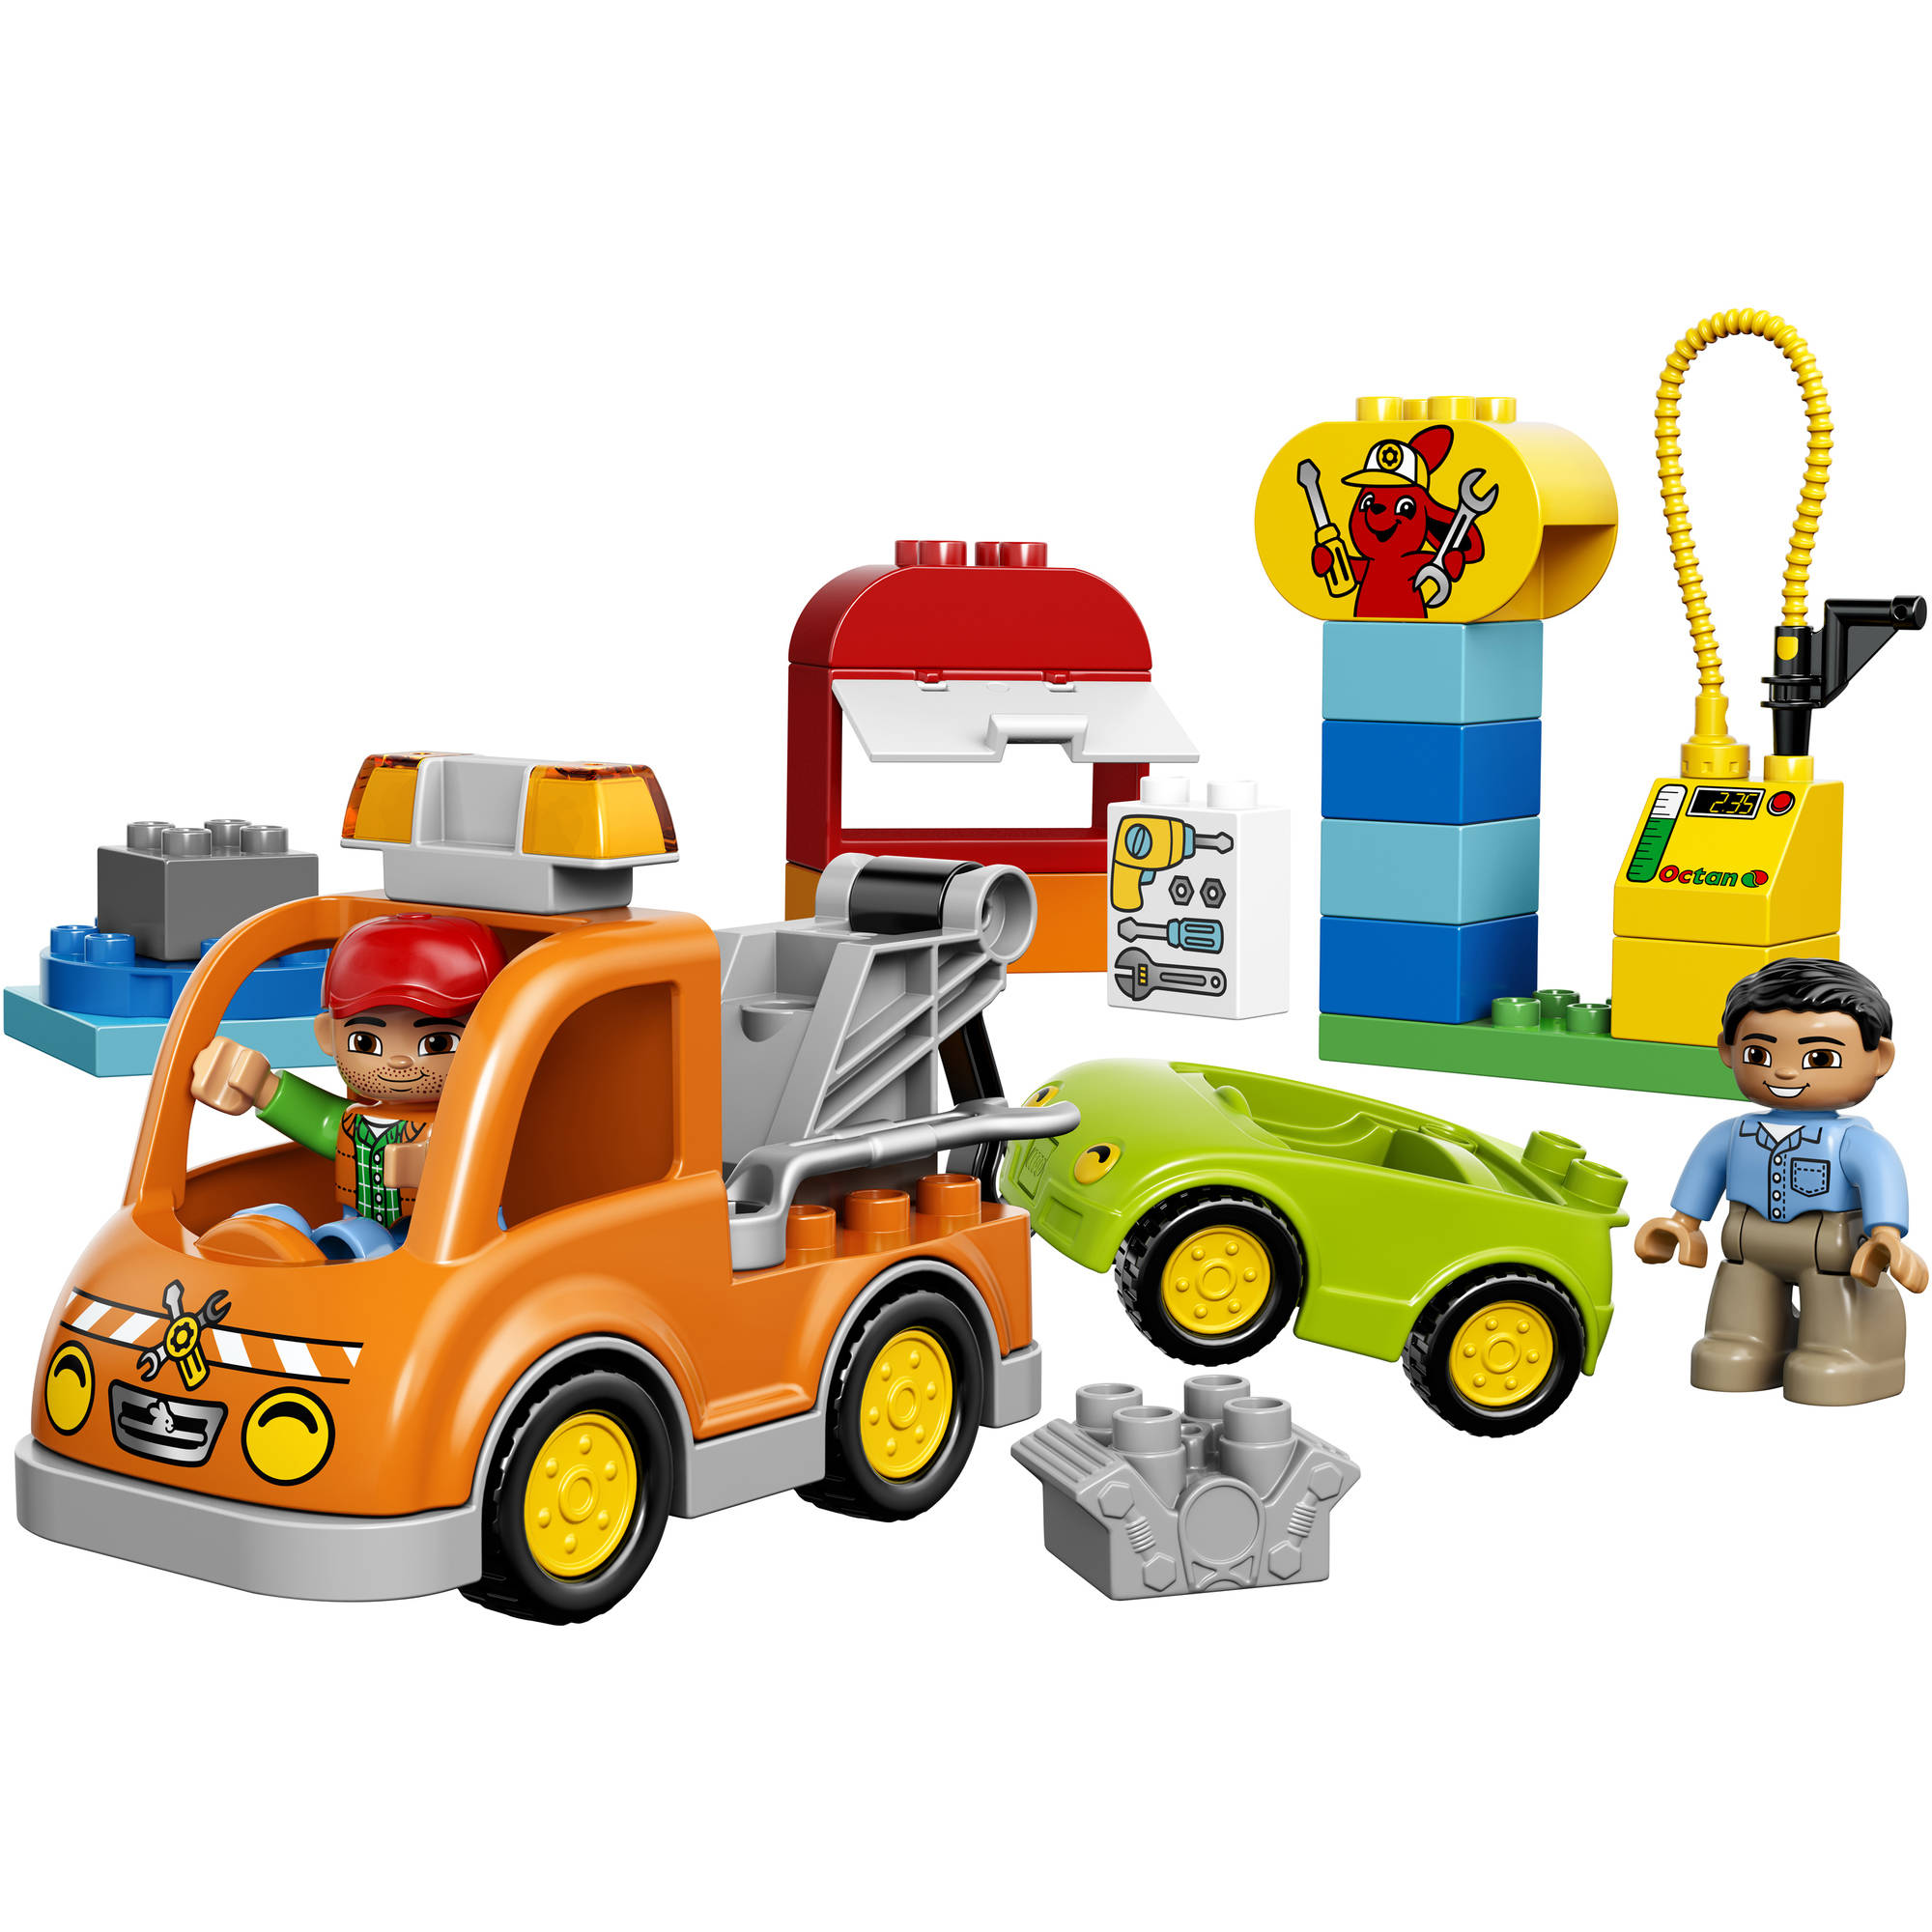 LEGO DUPLO Town Tow Truck, 10814 - image 4 of 6